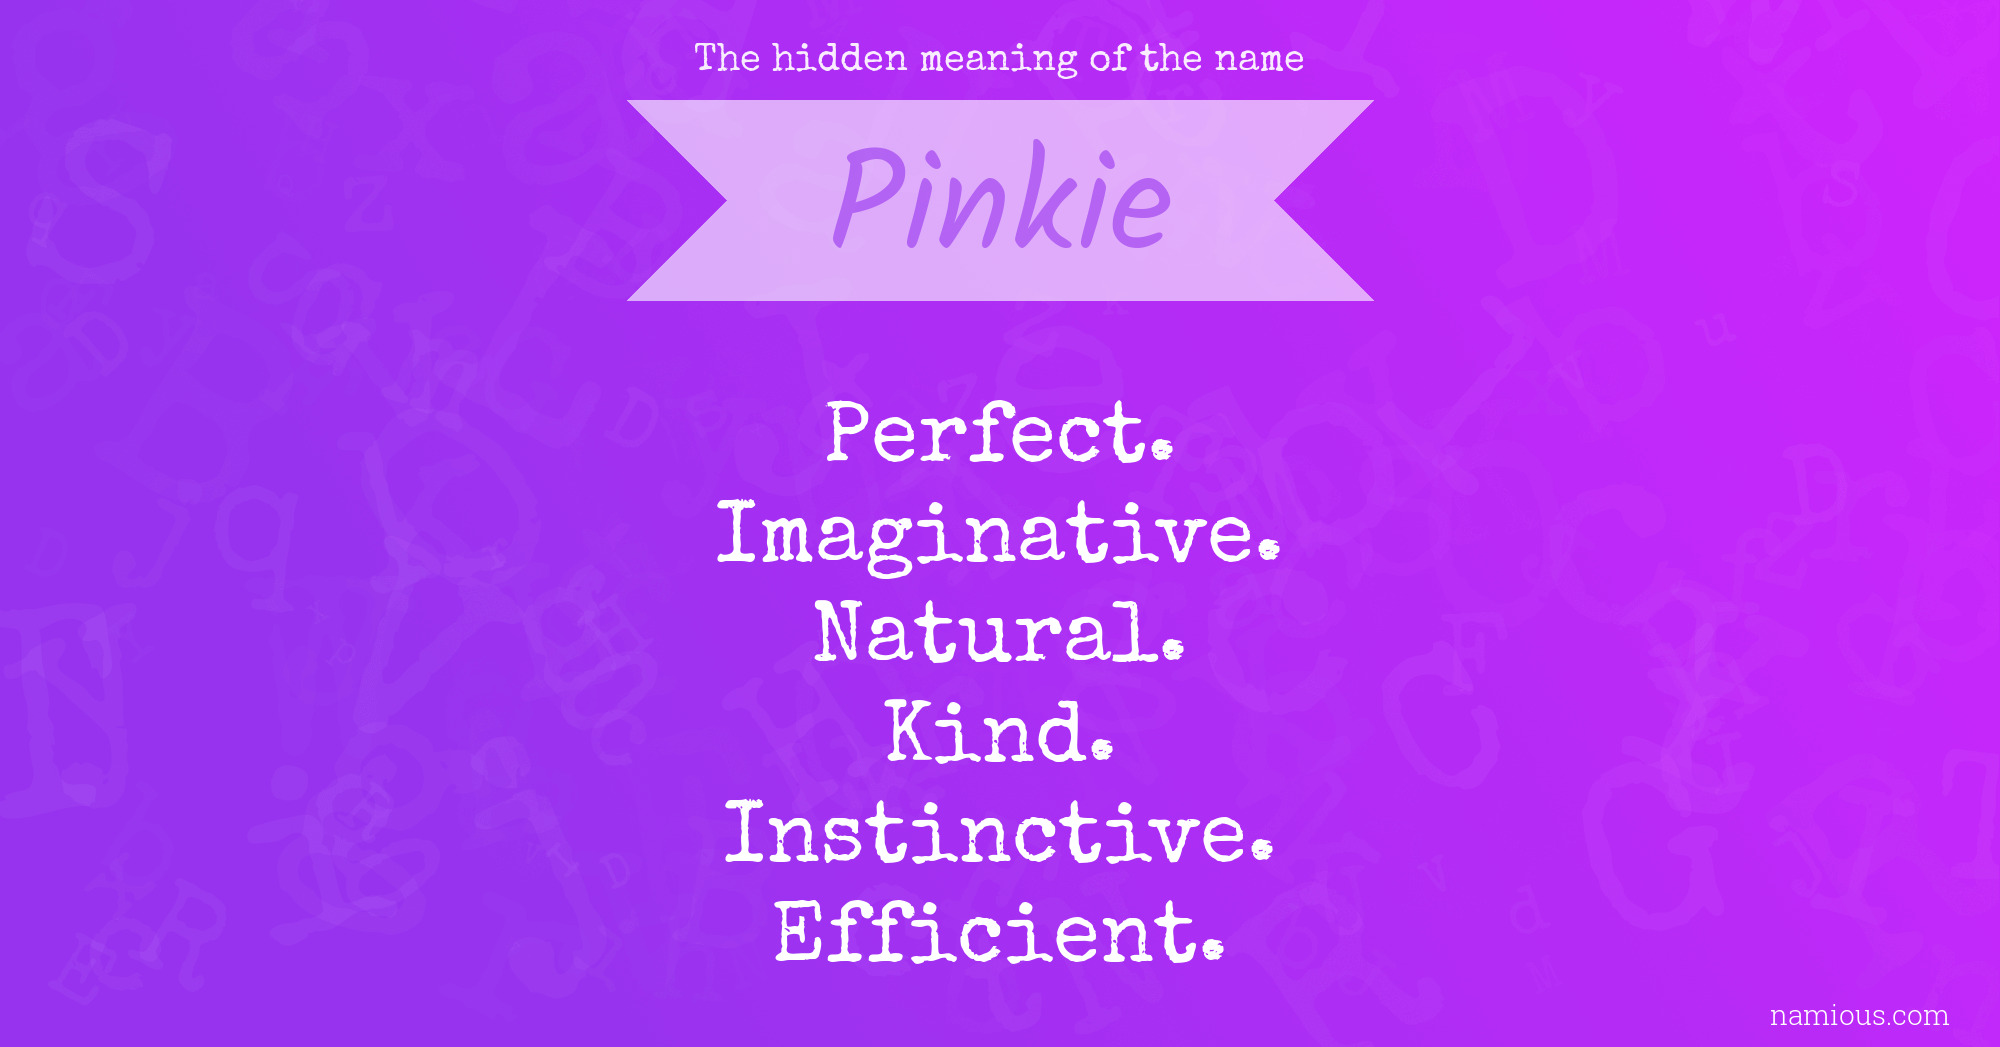 The hidden meaning of the name Pinkie